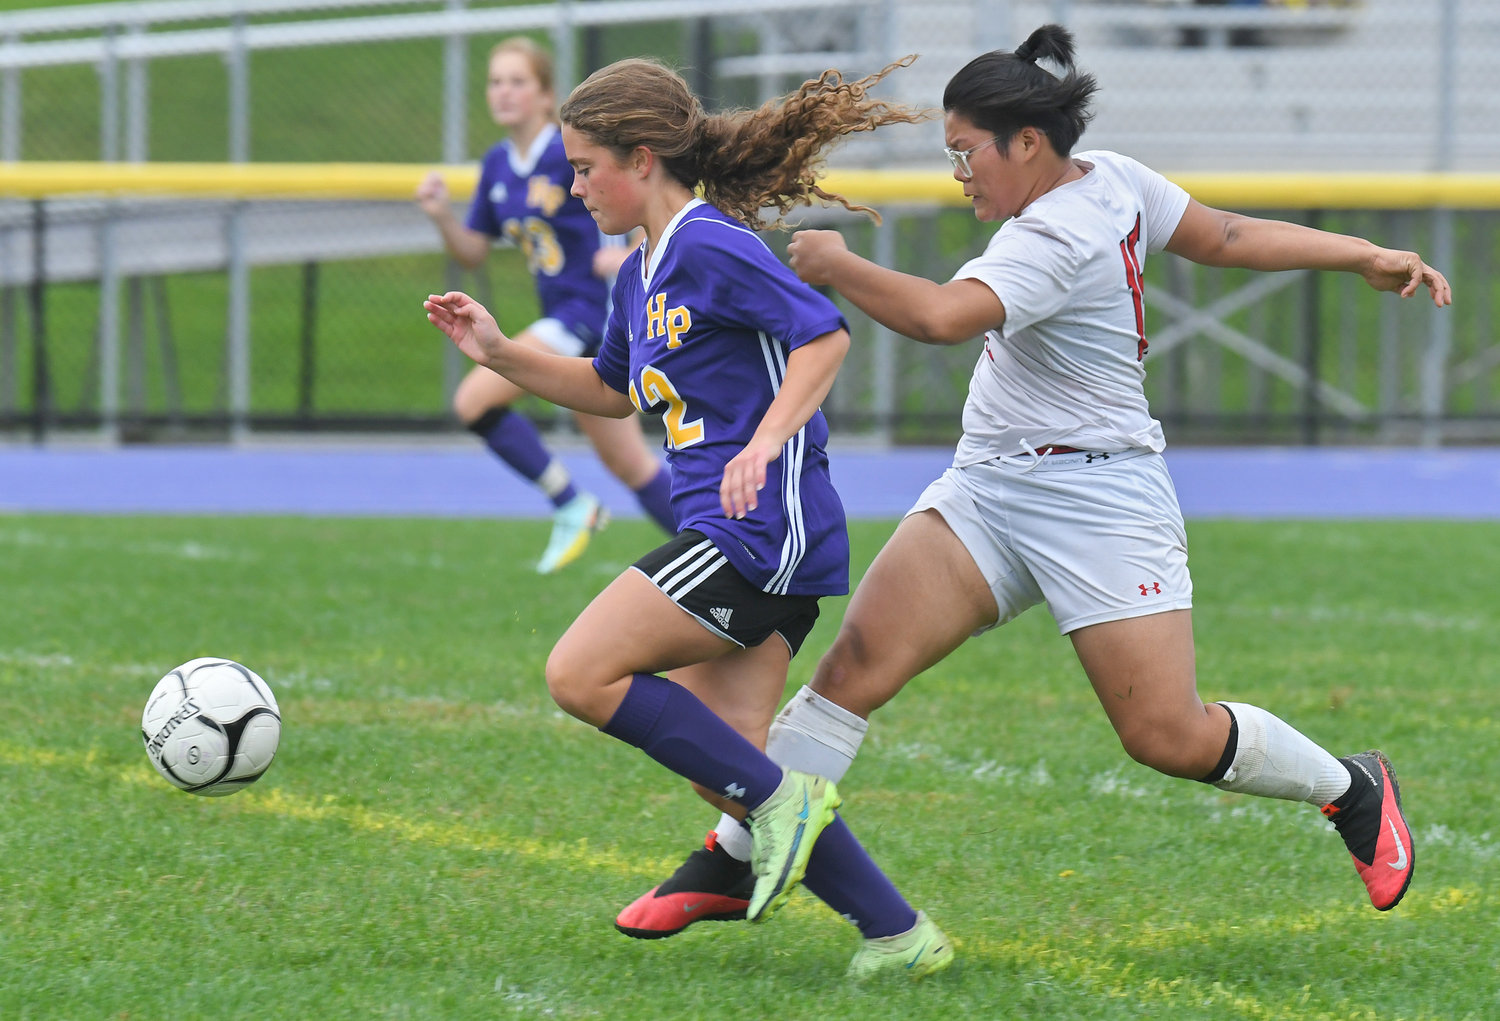 Holland Patent’s Brianna Mullins out runs Proctor’s Hser Eh Ler Paw to the goal and scored the first goal of the game and the only goal in the first half Tuesday at Holland Patent. The hosts won 2-0.